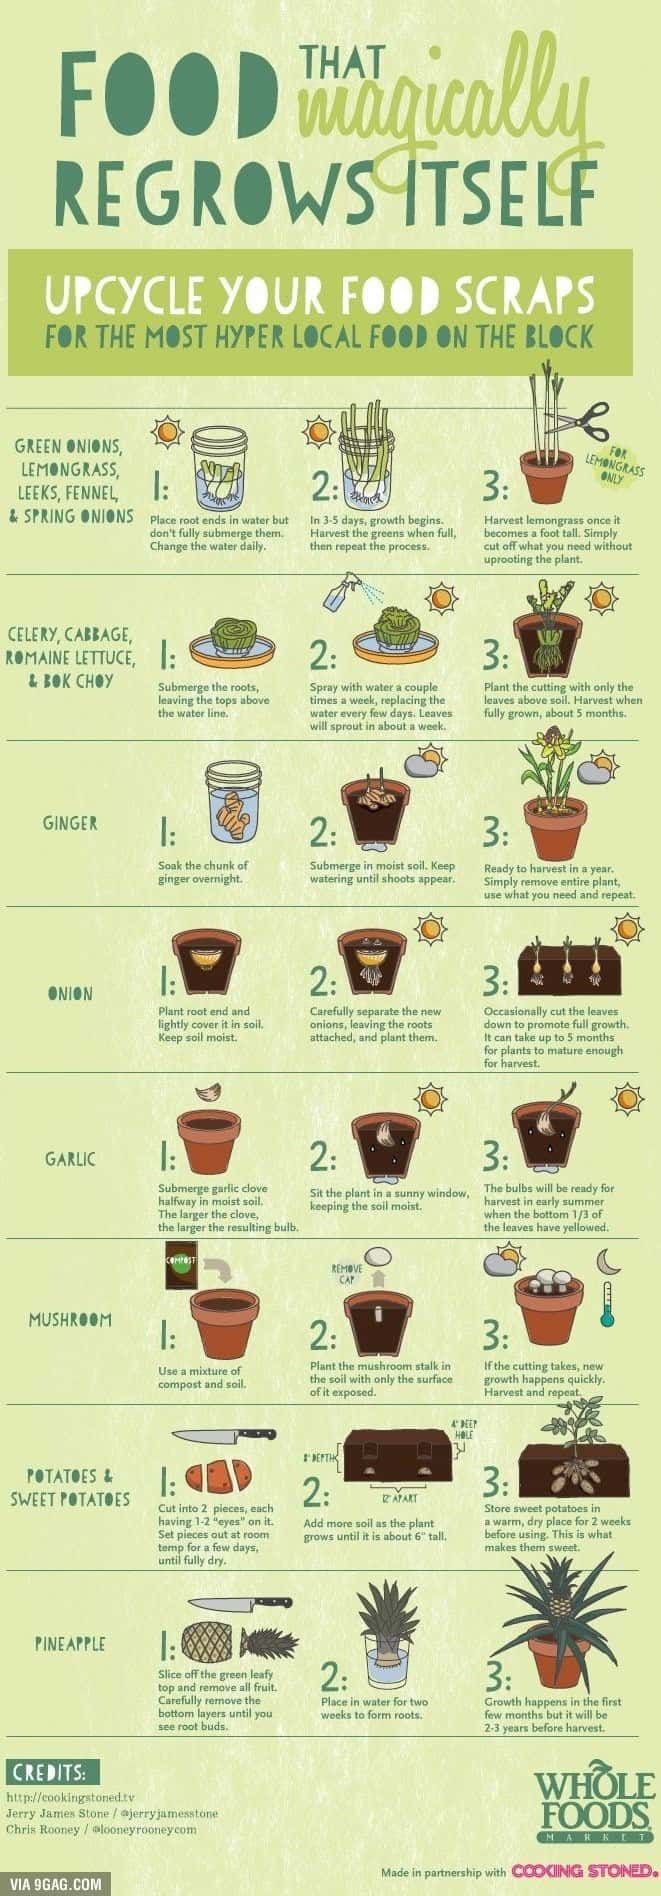 upcycle foods, chart that shows how to recycle foods